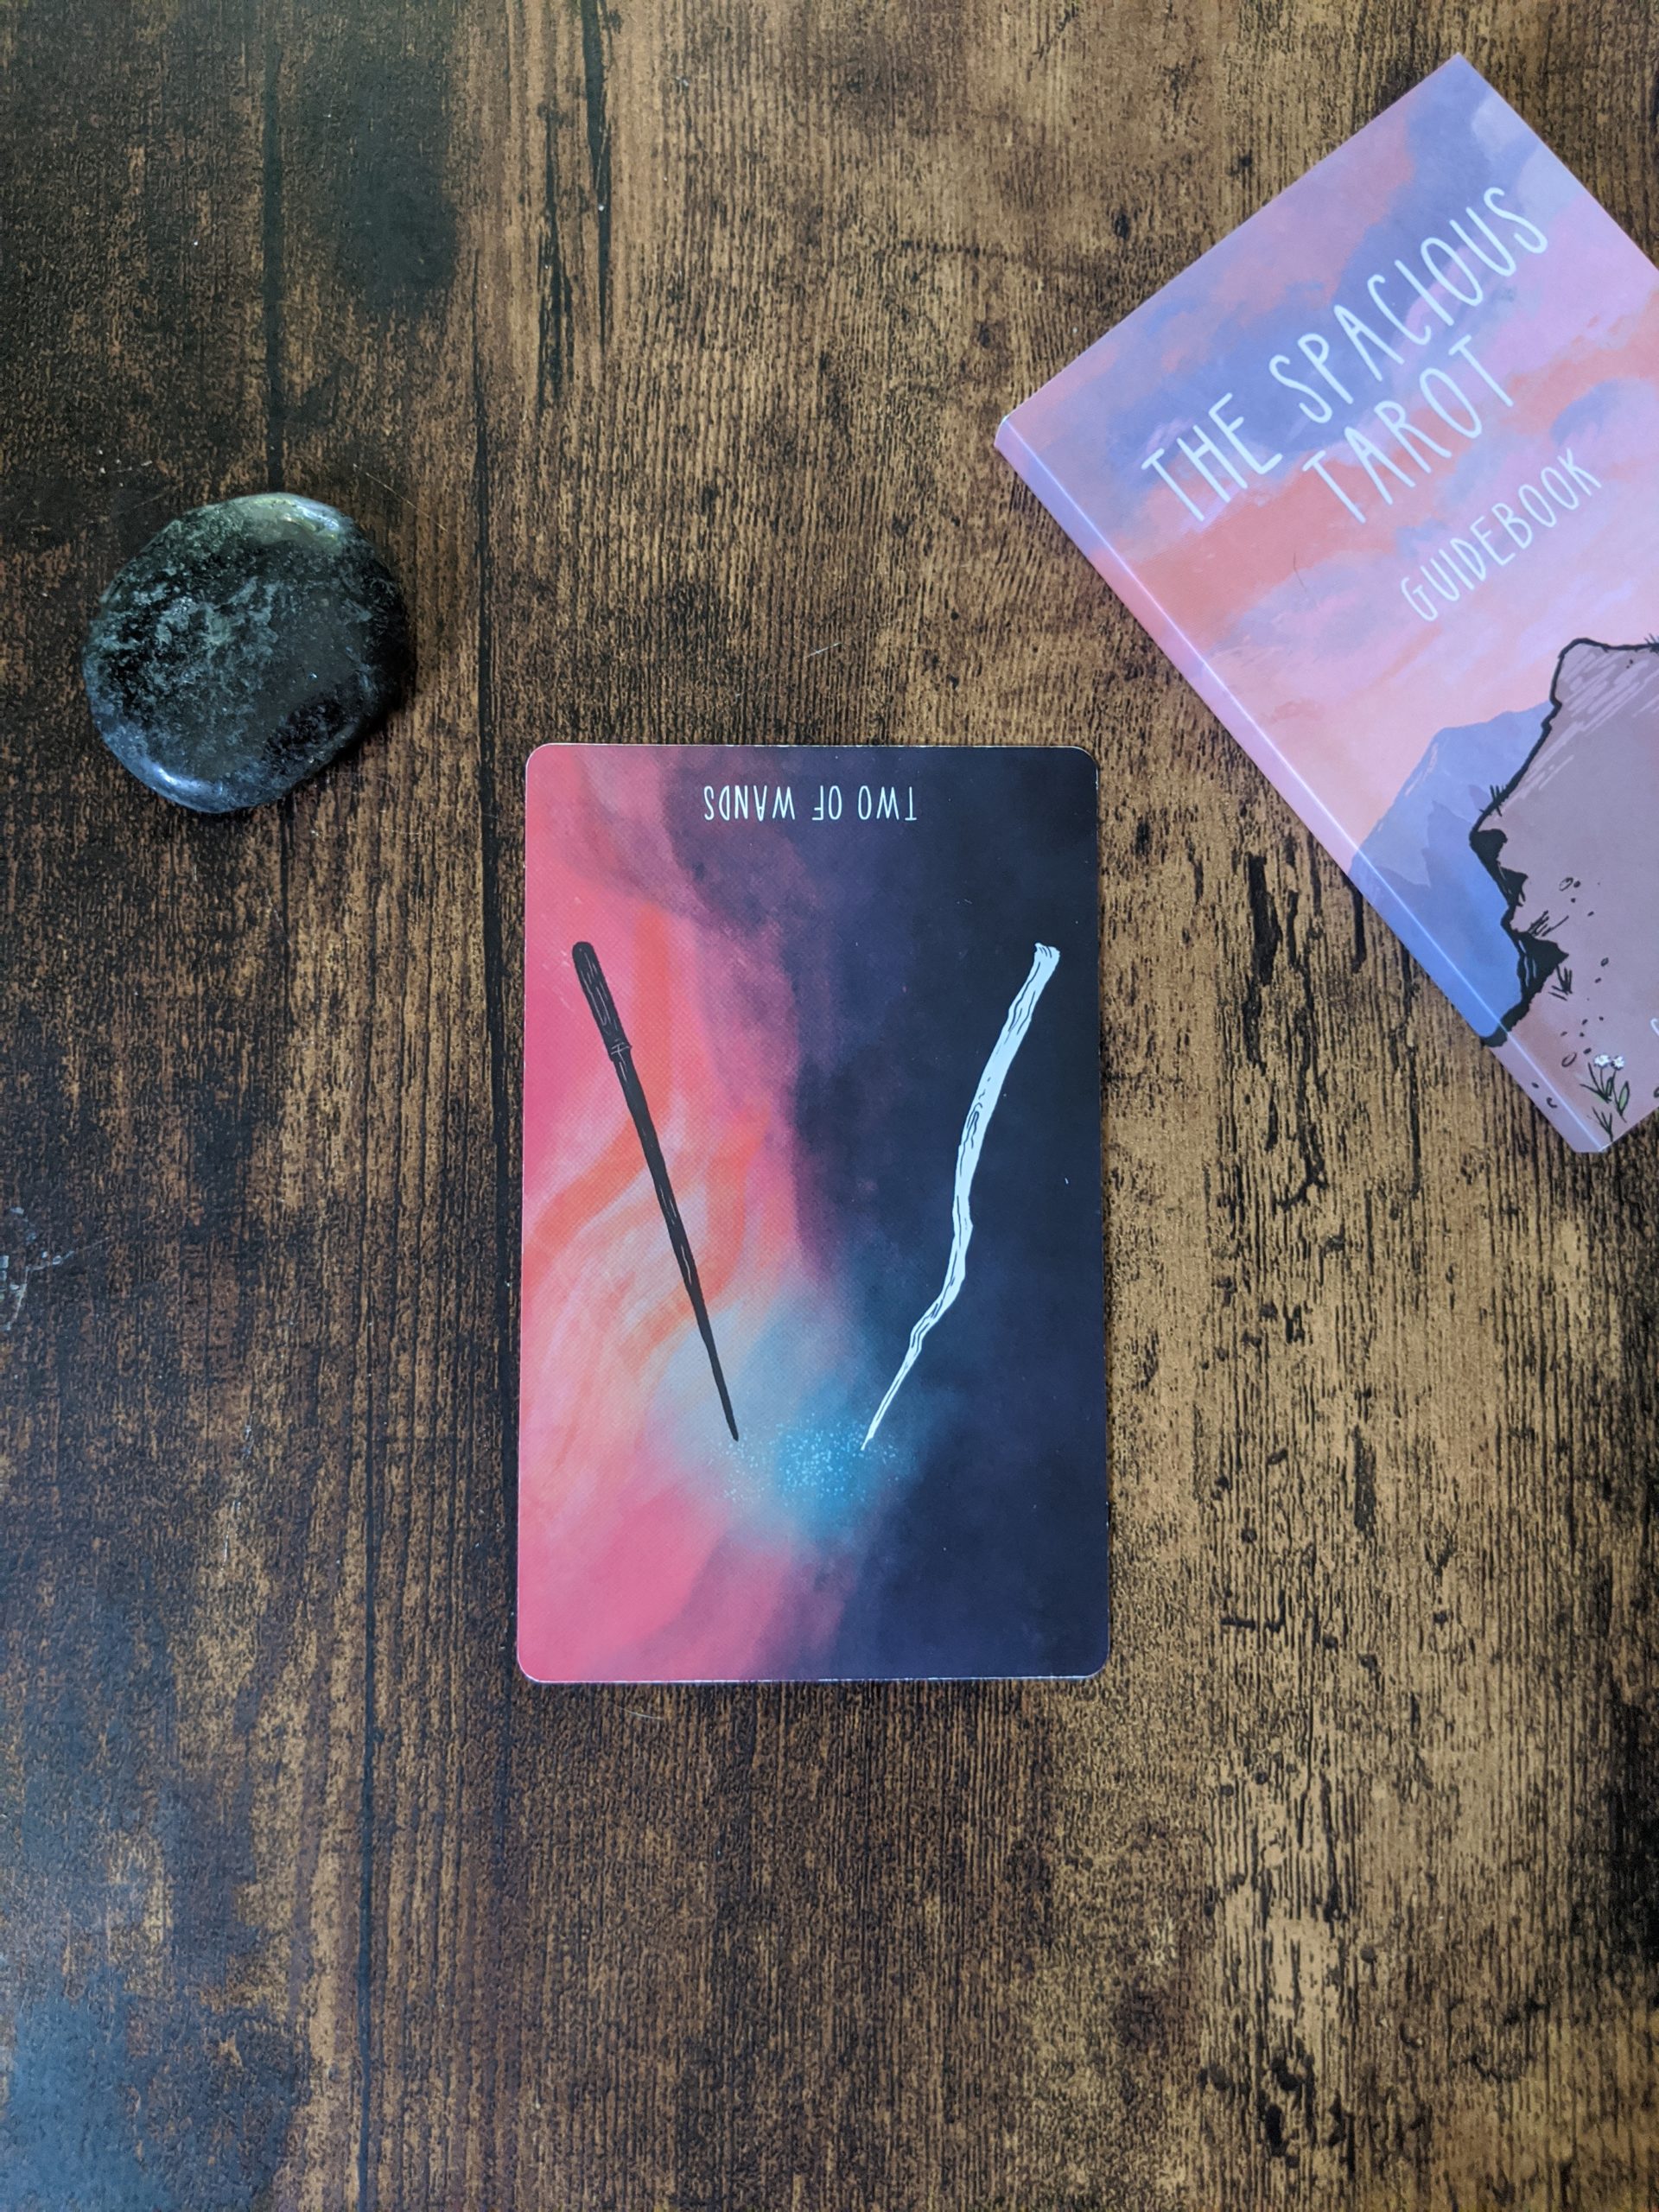 Energetic commitments with the Two of Wands